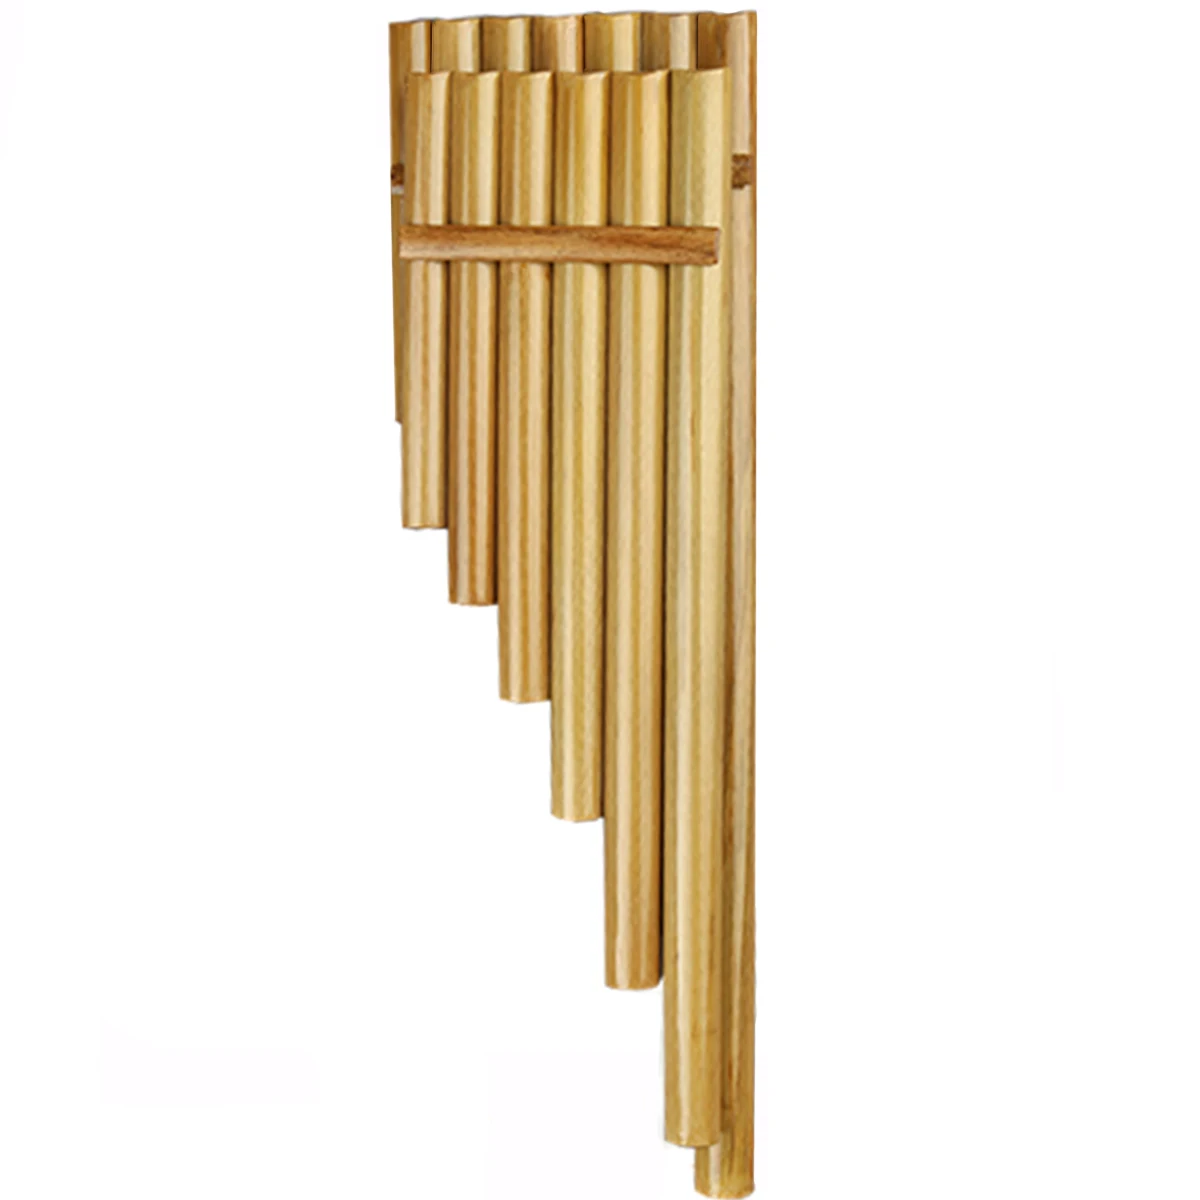 13 Pipes Southern Amercian Right Hand Pan Flute Musical Instruments Original Colour Flute De Pan Woodwind Instruments  Pan Pipes